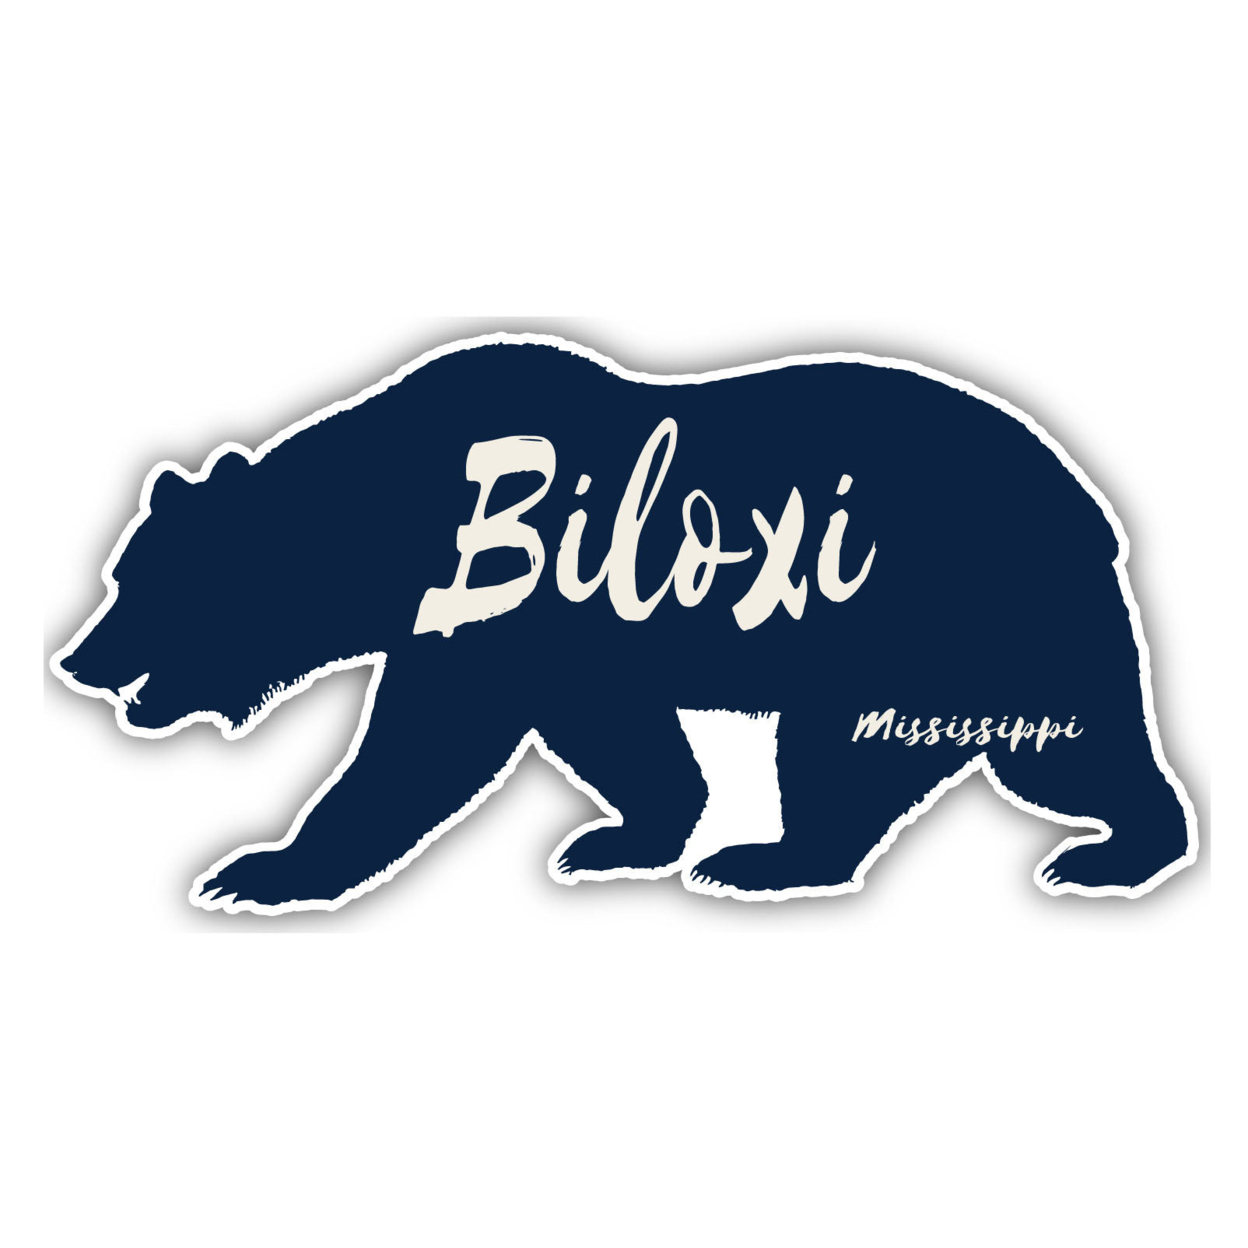 Biloxi Mississippi Souvenir Decorative Stickers (Choose Theme And Size) - 4-Pack, 6-Inch, Bear